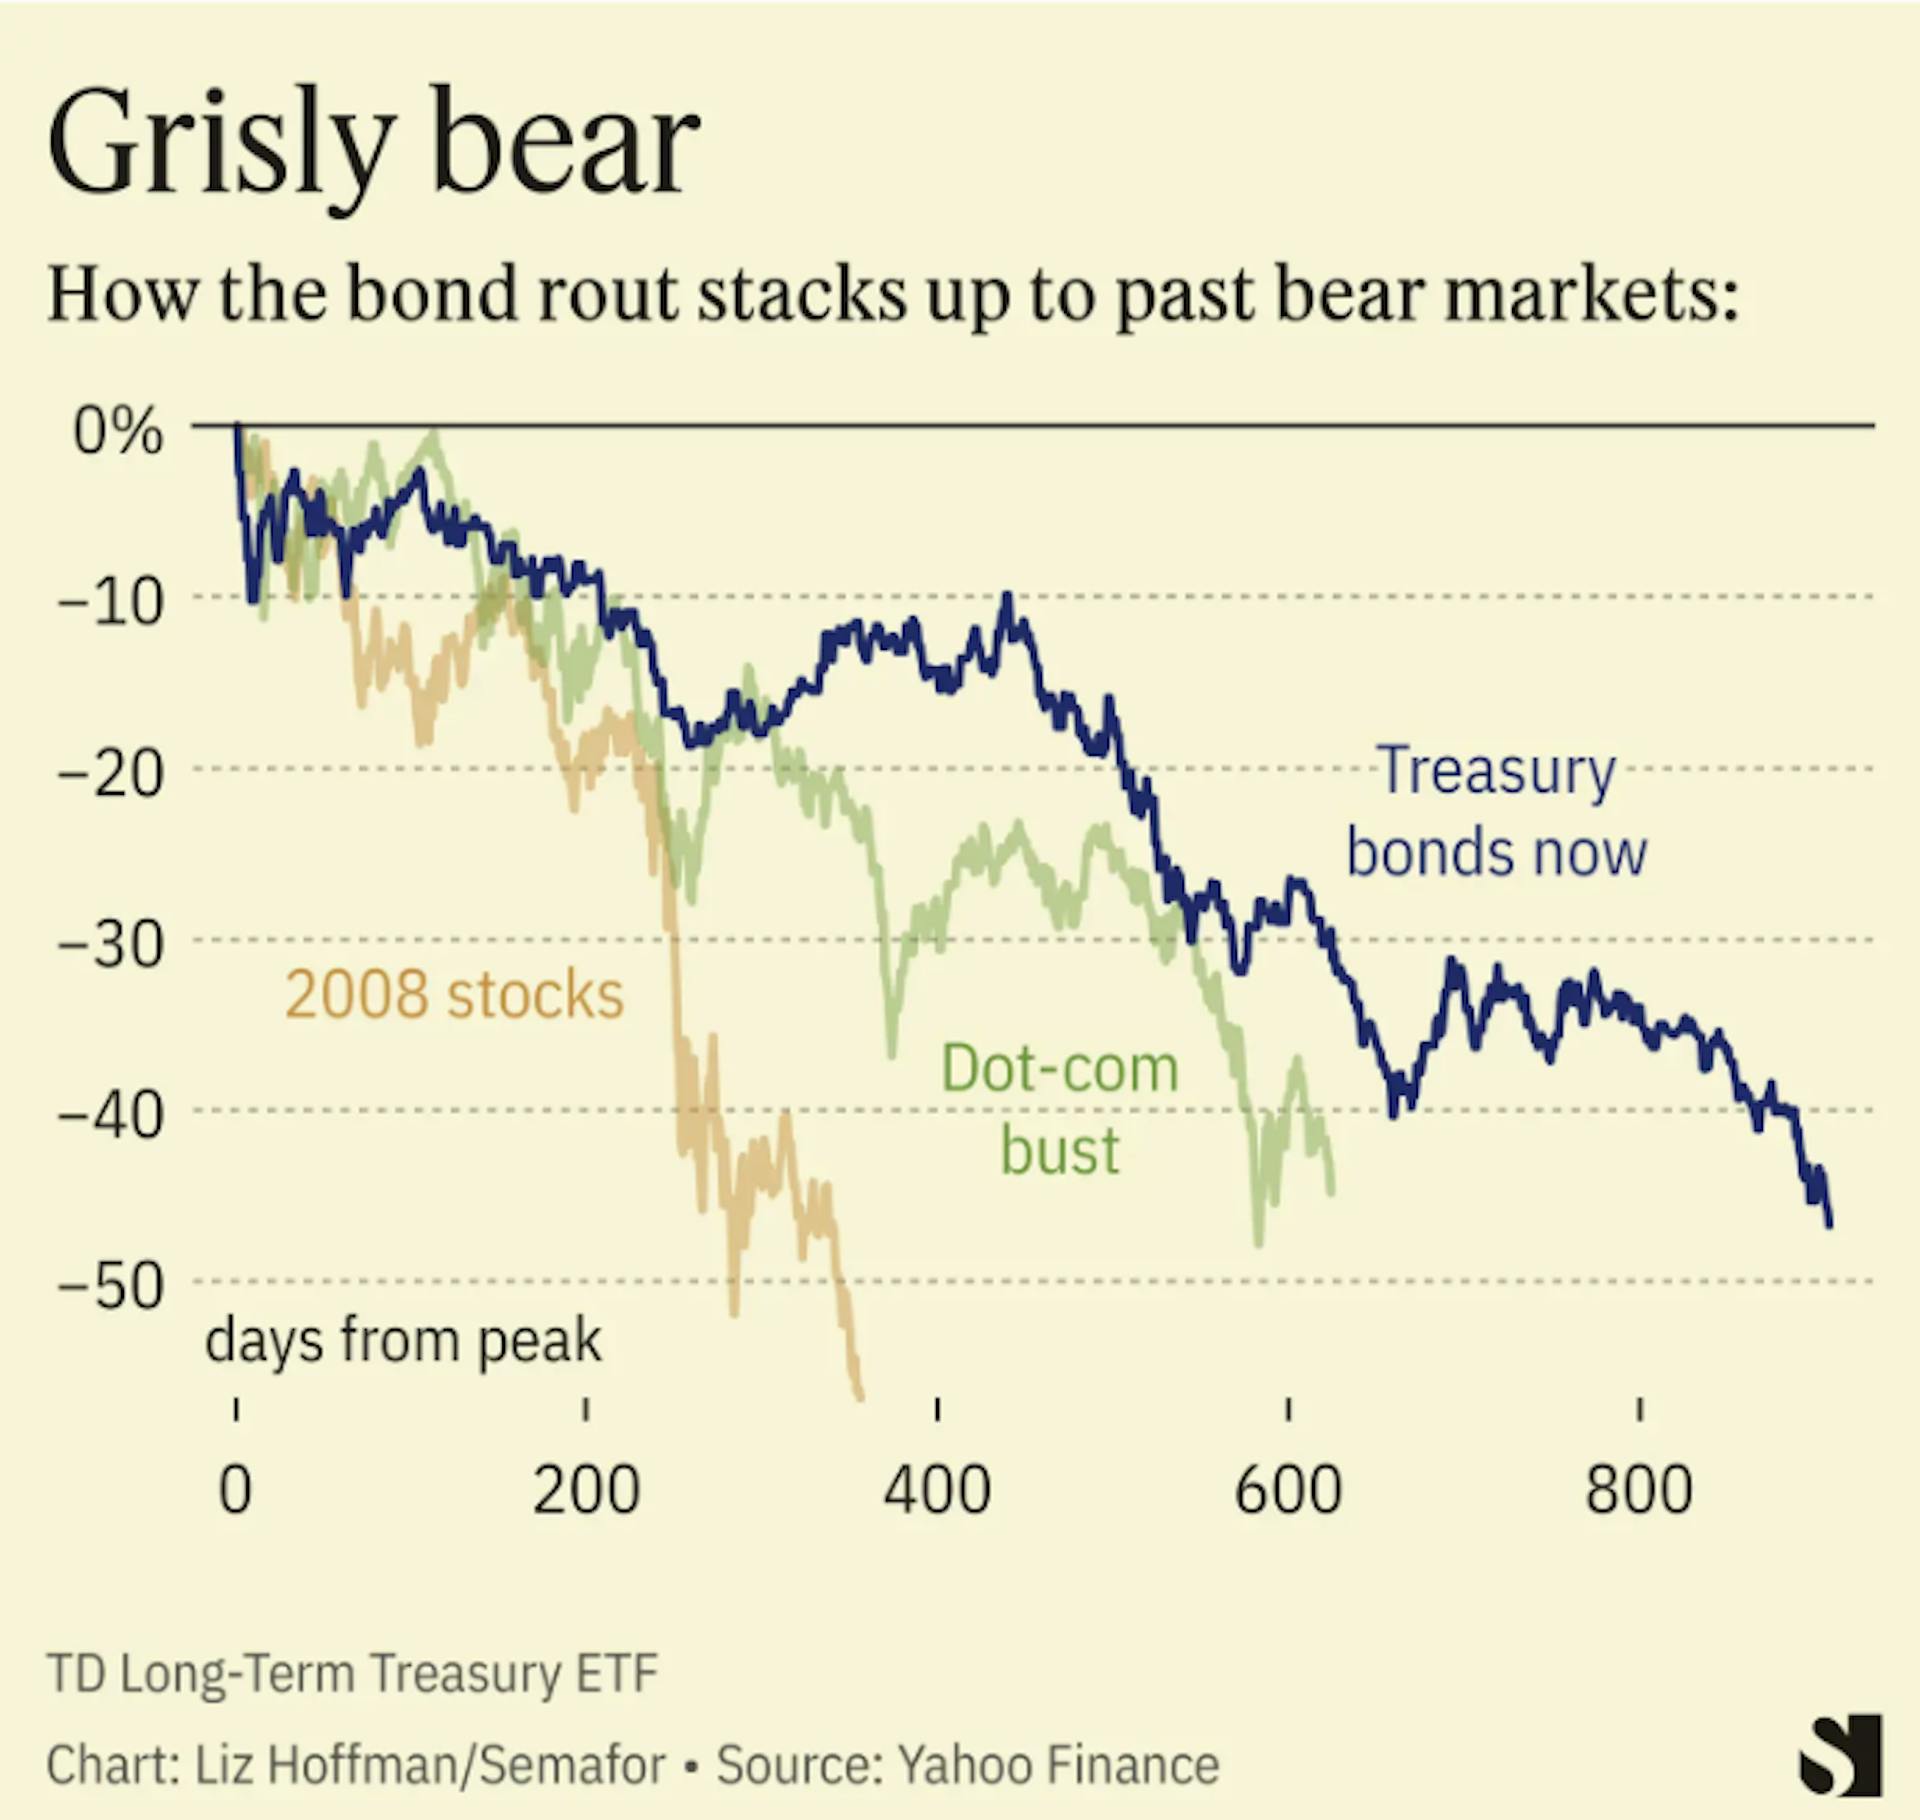 How the bond rout stacks up to past bear markets